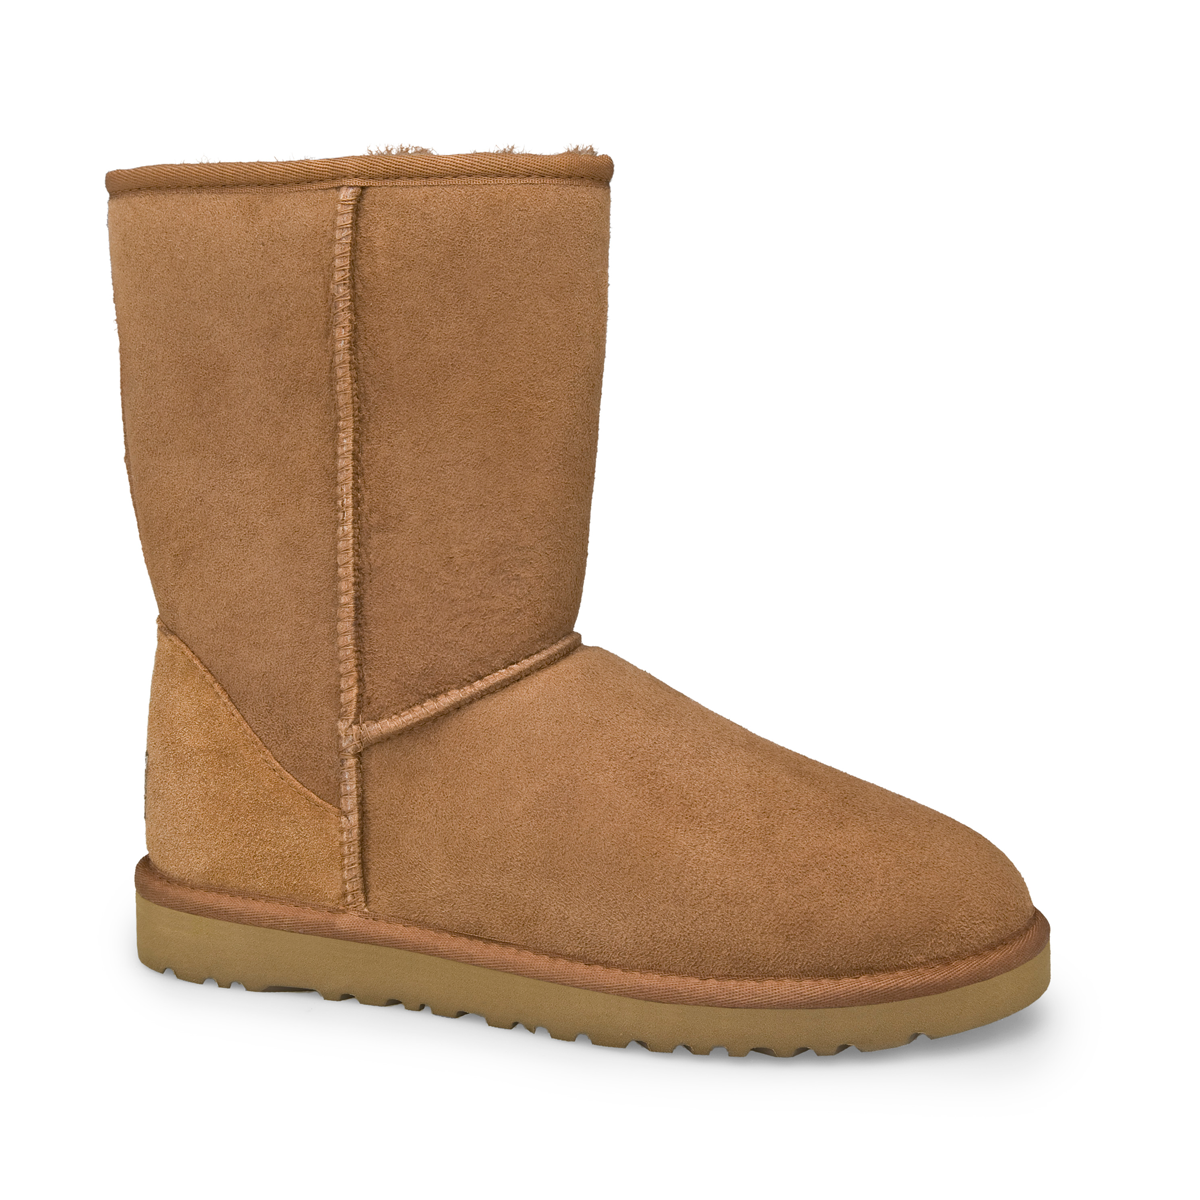 Ugg Boots Png - Ugg Womenu0026#39;s Classic Short Boot   Chestnut, Transparent background PNG HD thumbnail